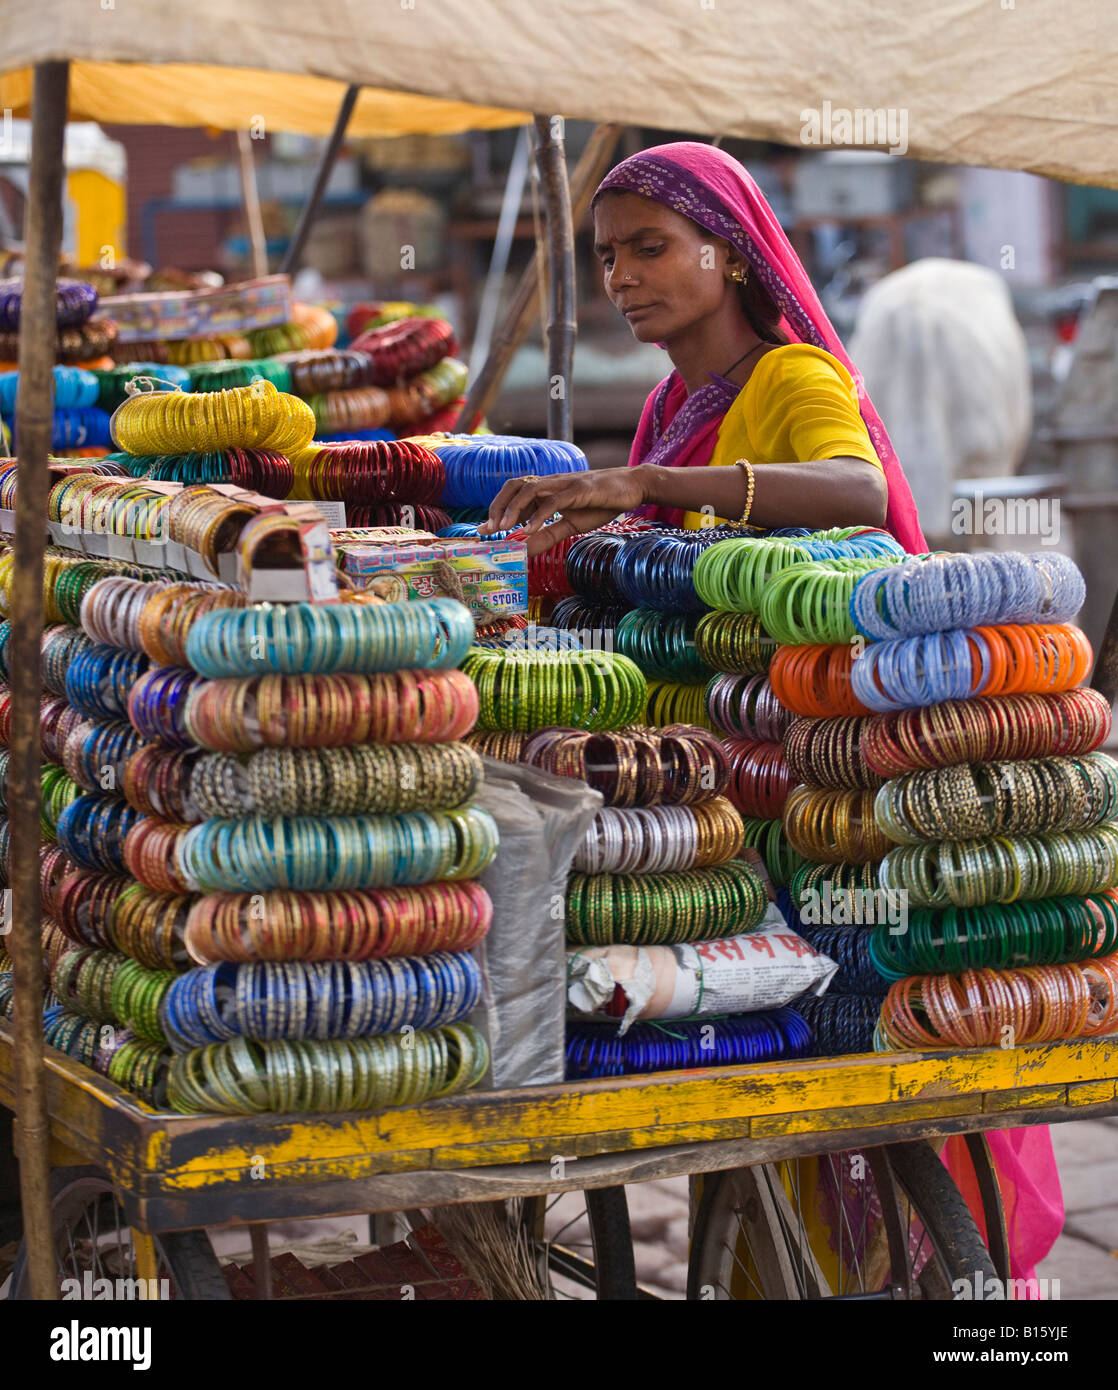 A RAJASTHANI WOMAN sells BRACELETS in JODHPUR also known as the BLUE CITY RAJASTHAN INDIA Stock Photo